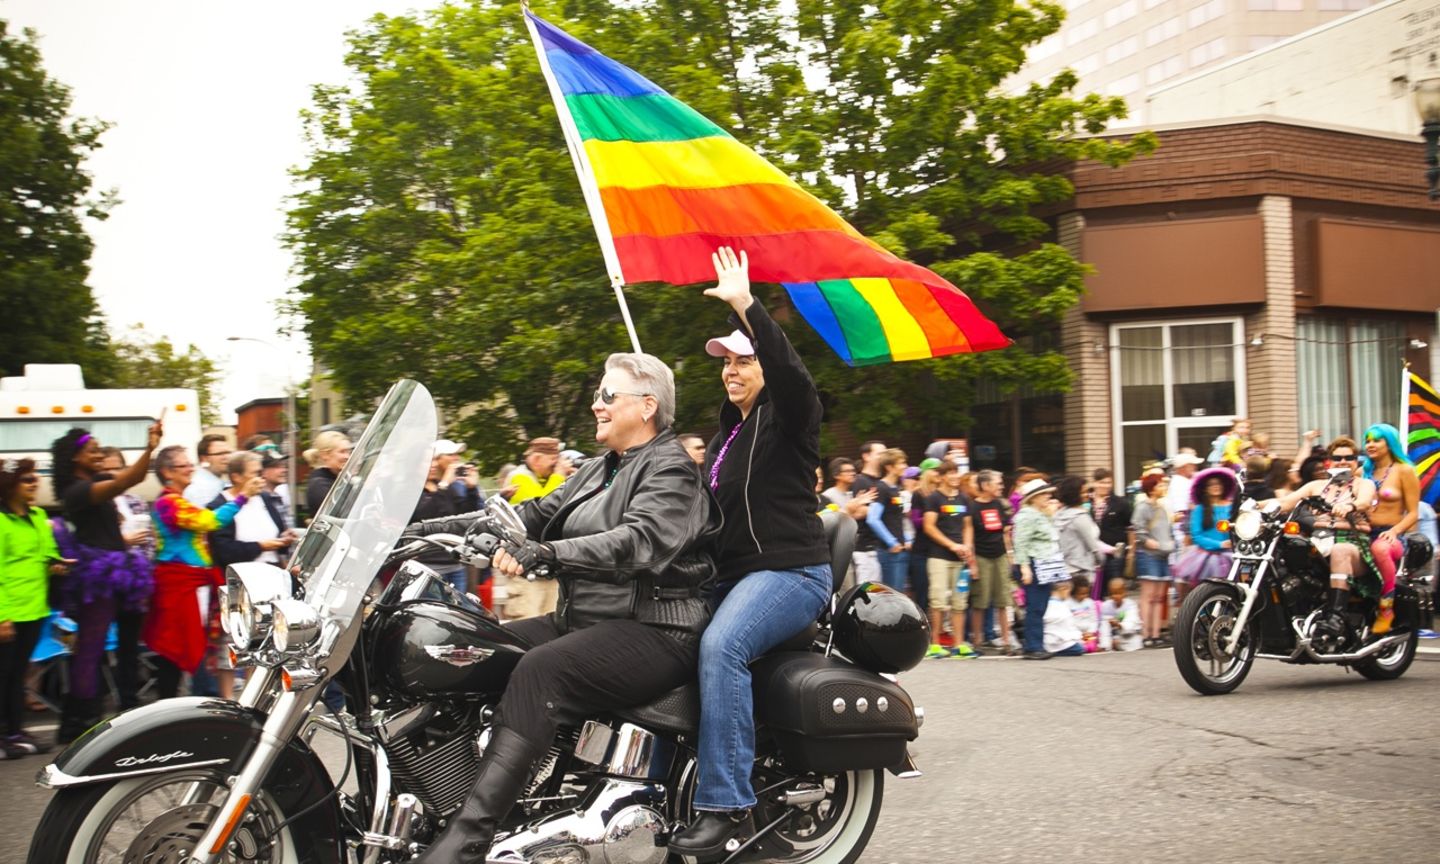 when is the gay pride parade in portland or